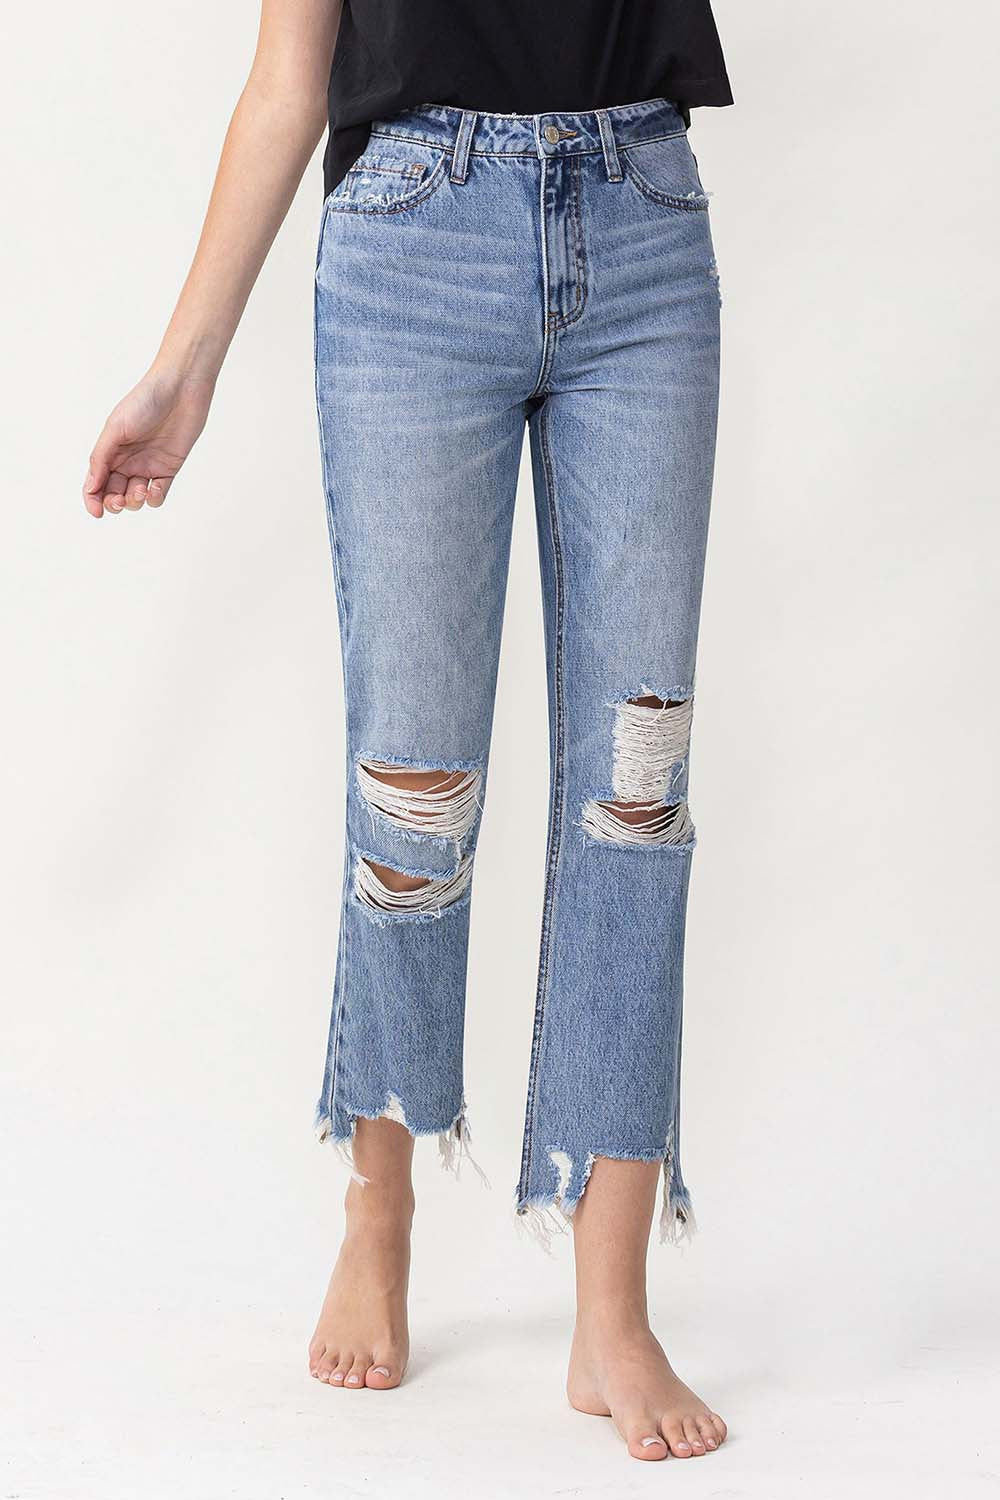 Lovervet High Rise Distressed Straight Jeans-Denim-Inspired by Justeen-Women's Clothing Boutique in Chicago, Illinois